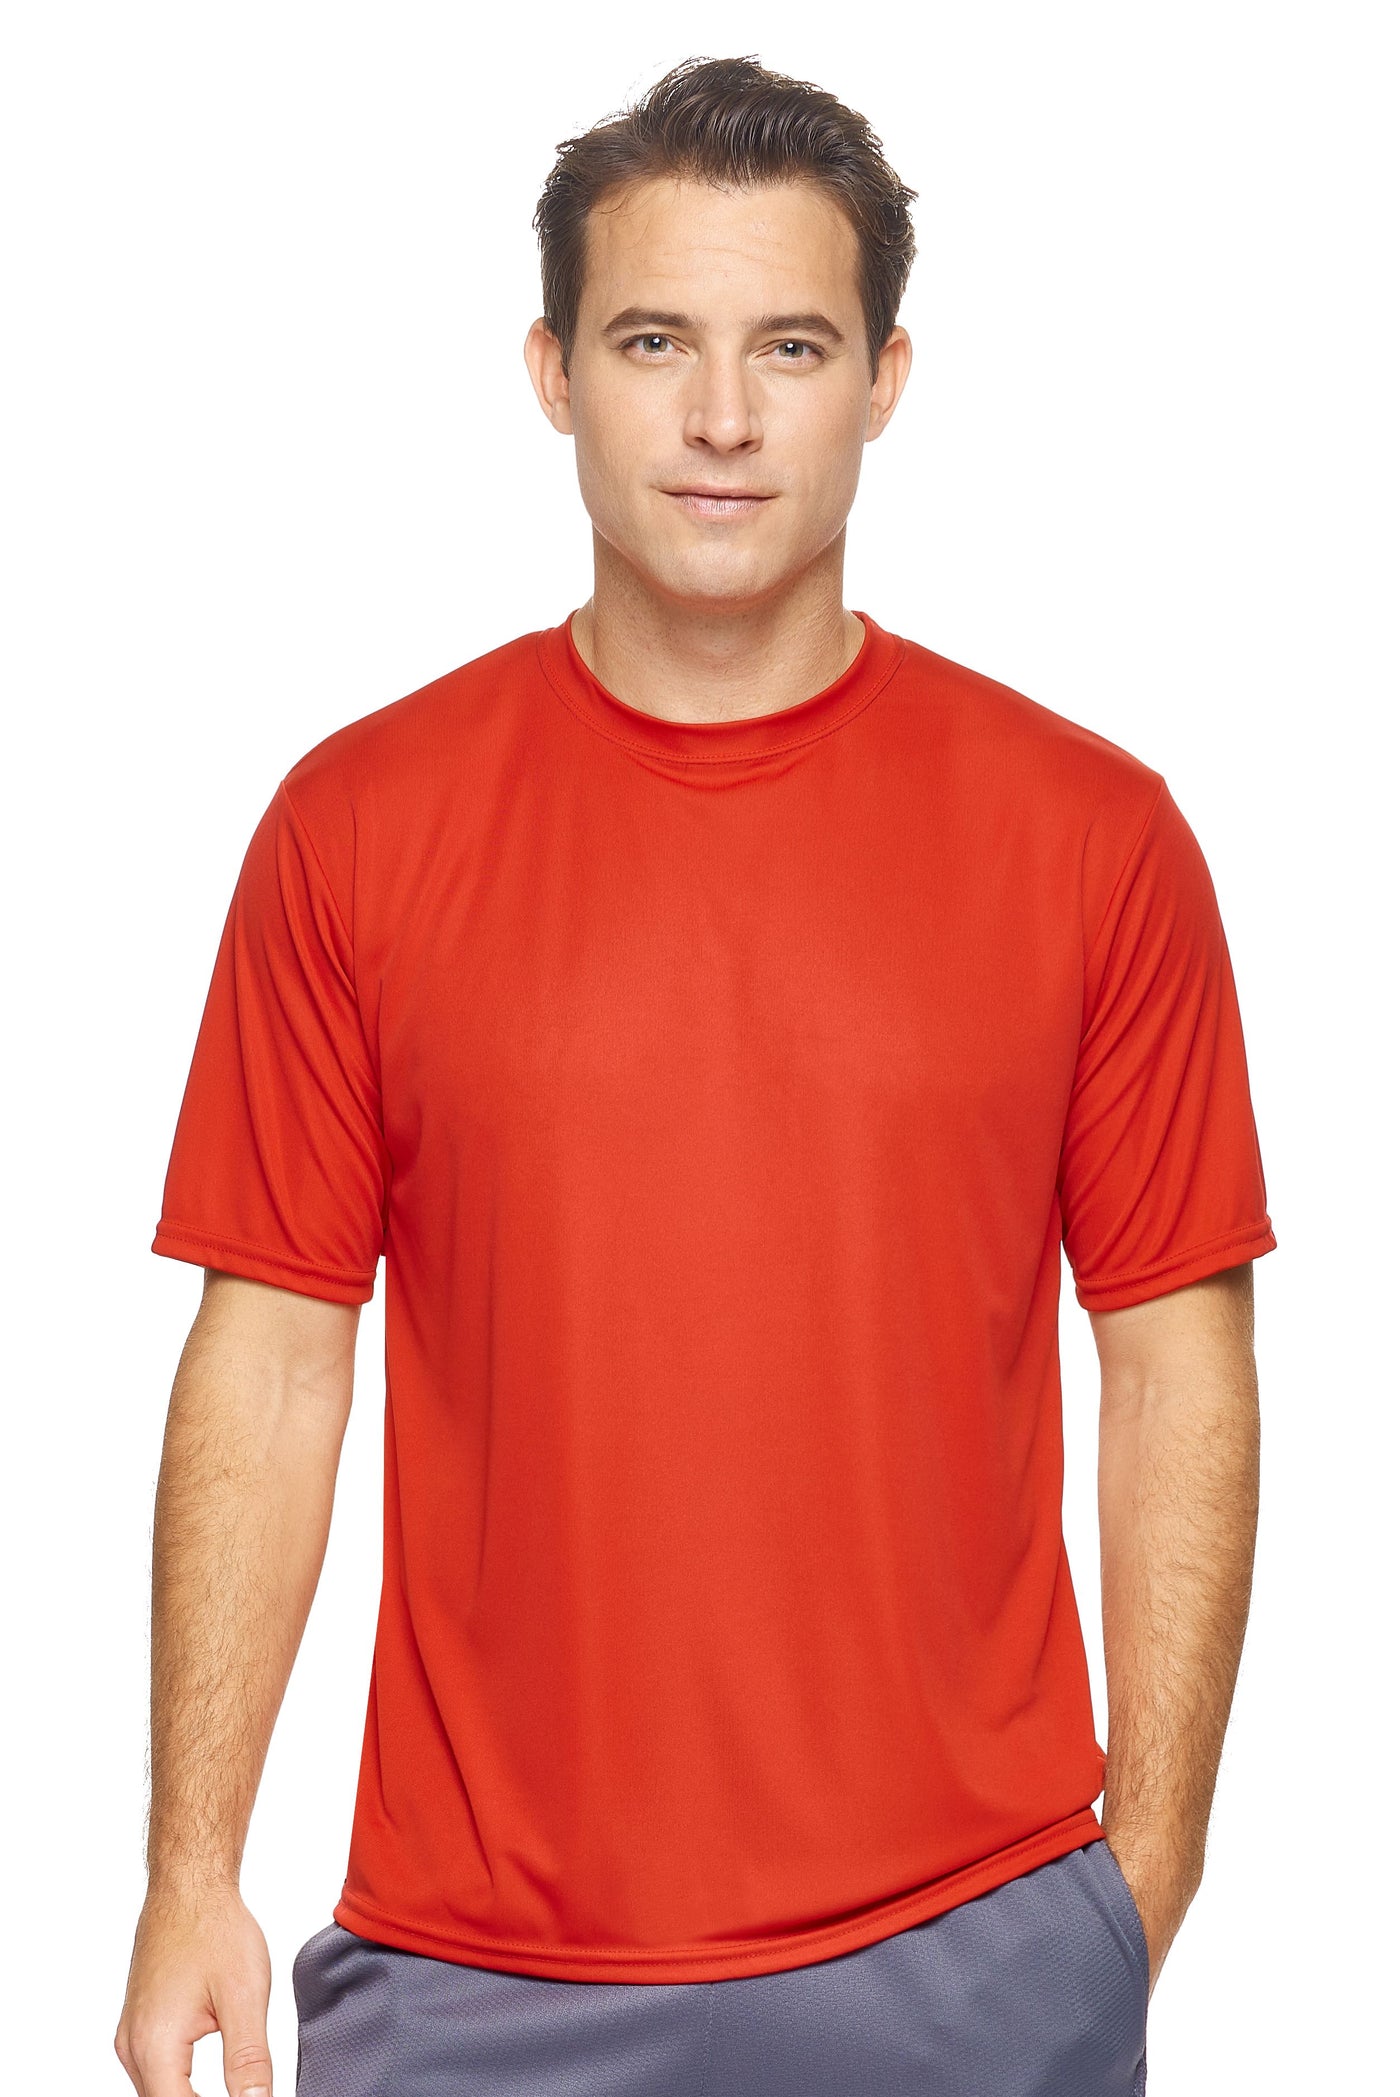 Expert Brand Retail Made in USA Men's Sportswear Activewear Running Long Sleeve Shirt Pk Max true red#color_true-red